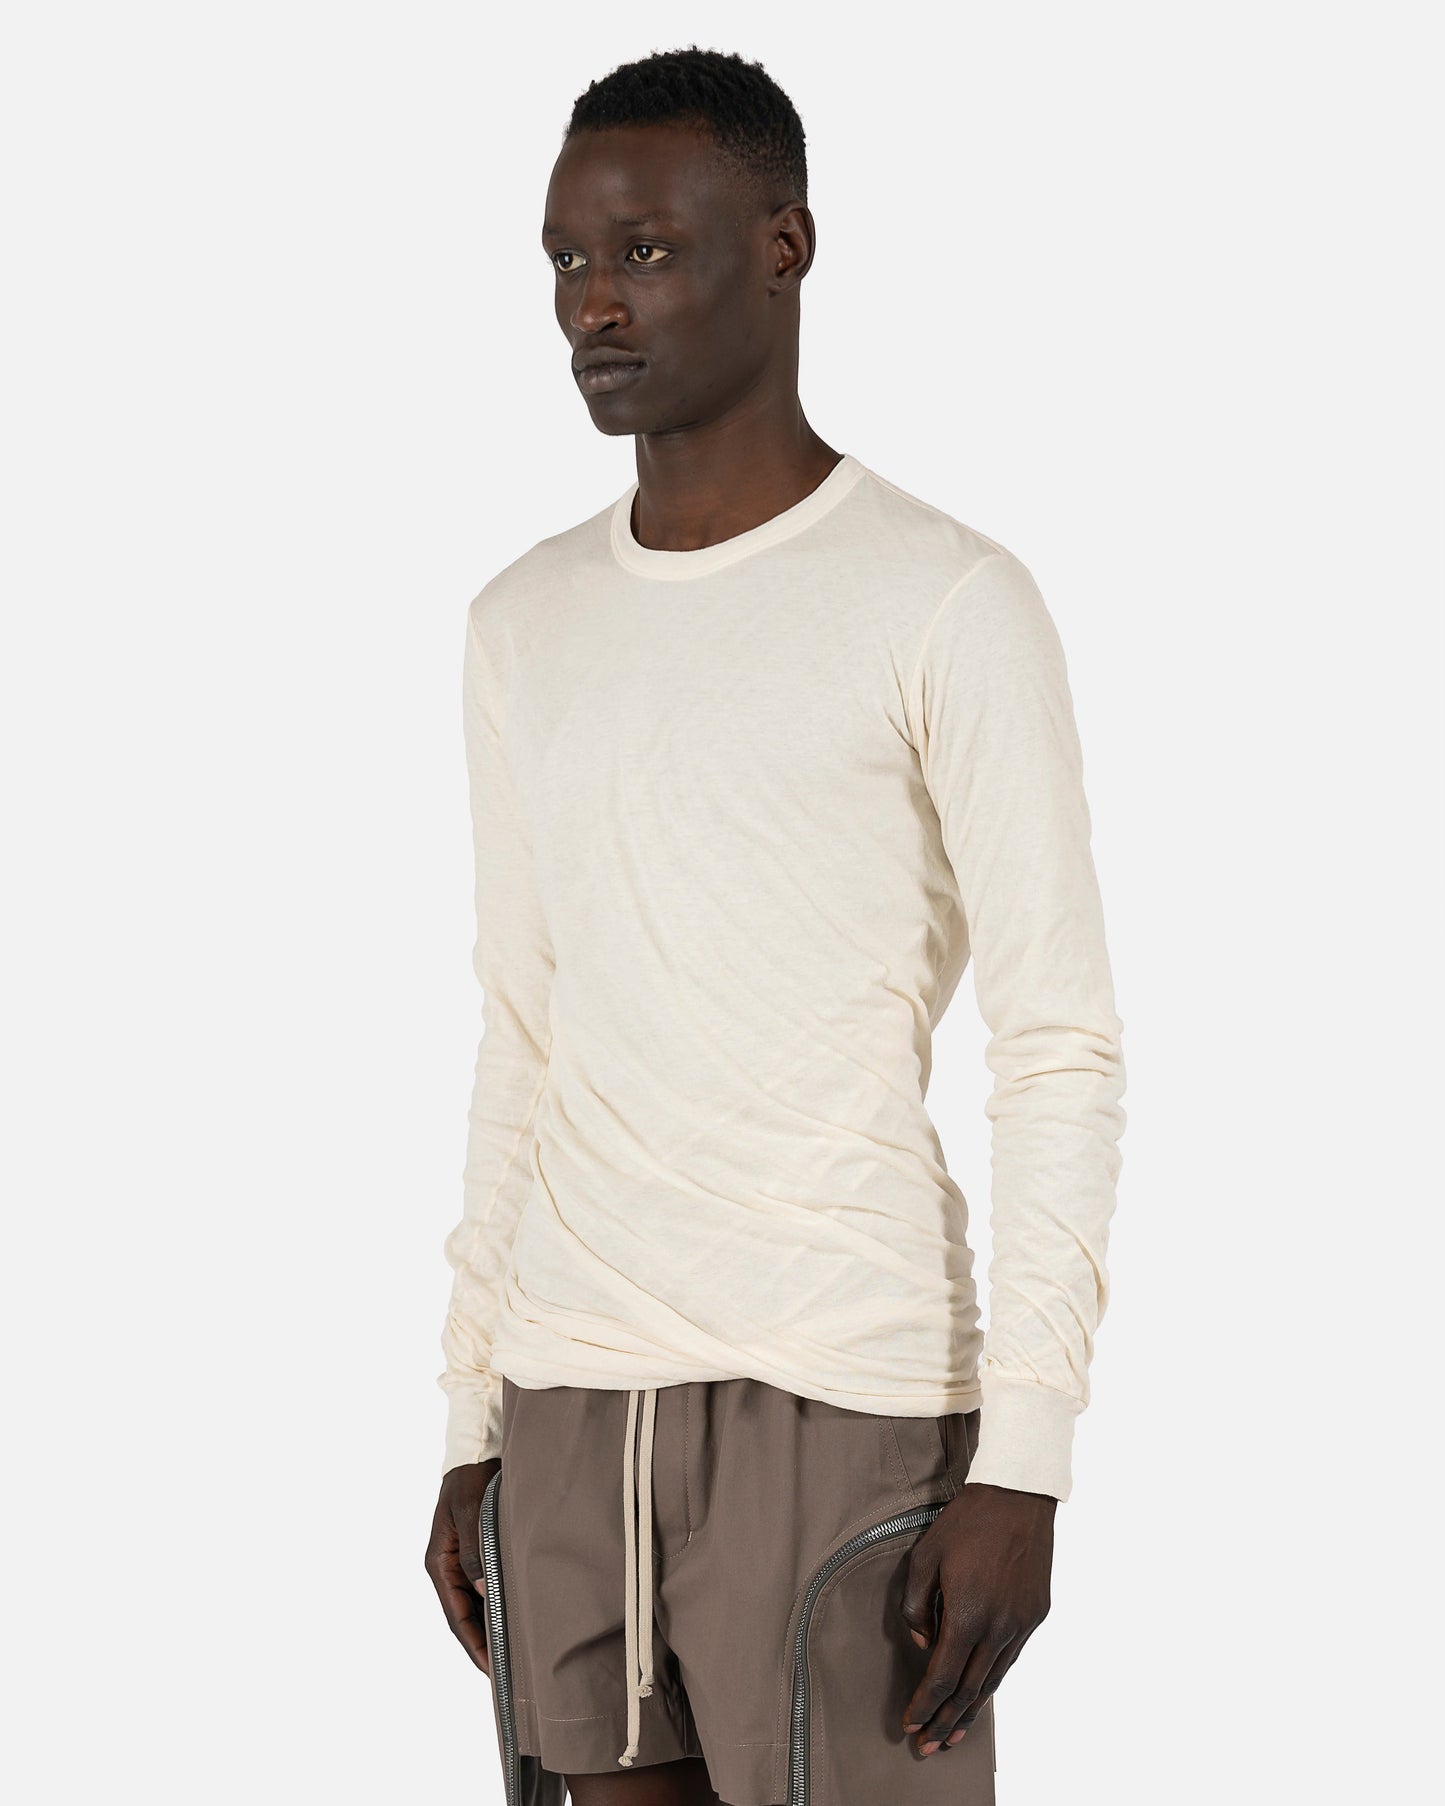 Rick Owens Men's T-Shirts Double Layer Longsleeve T-Shirt in Natural